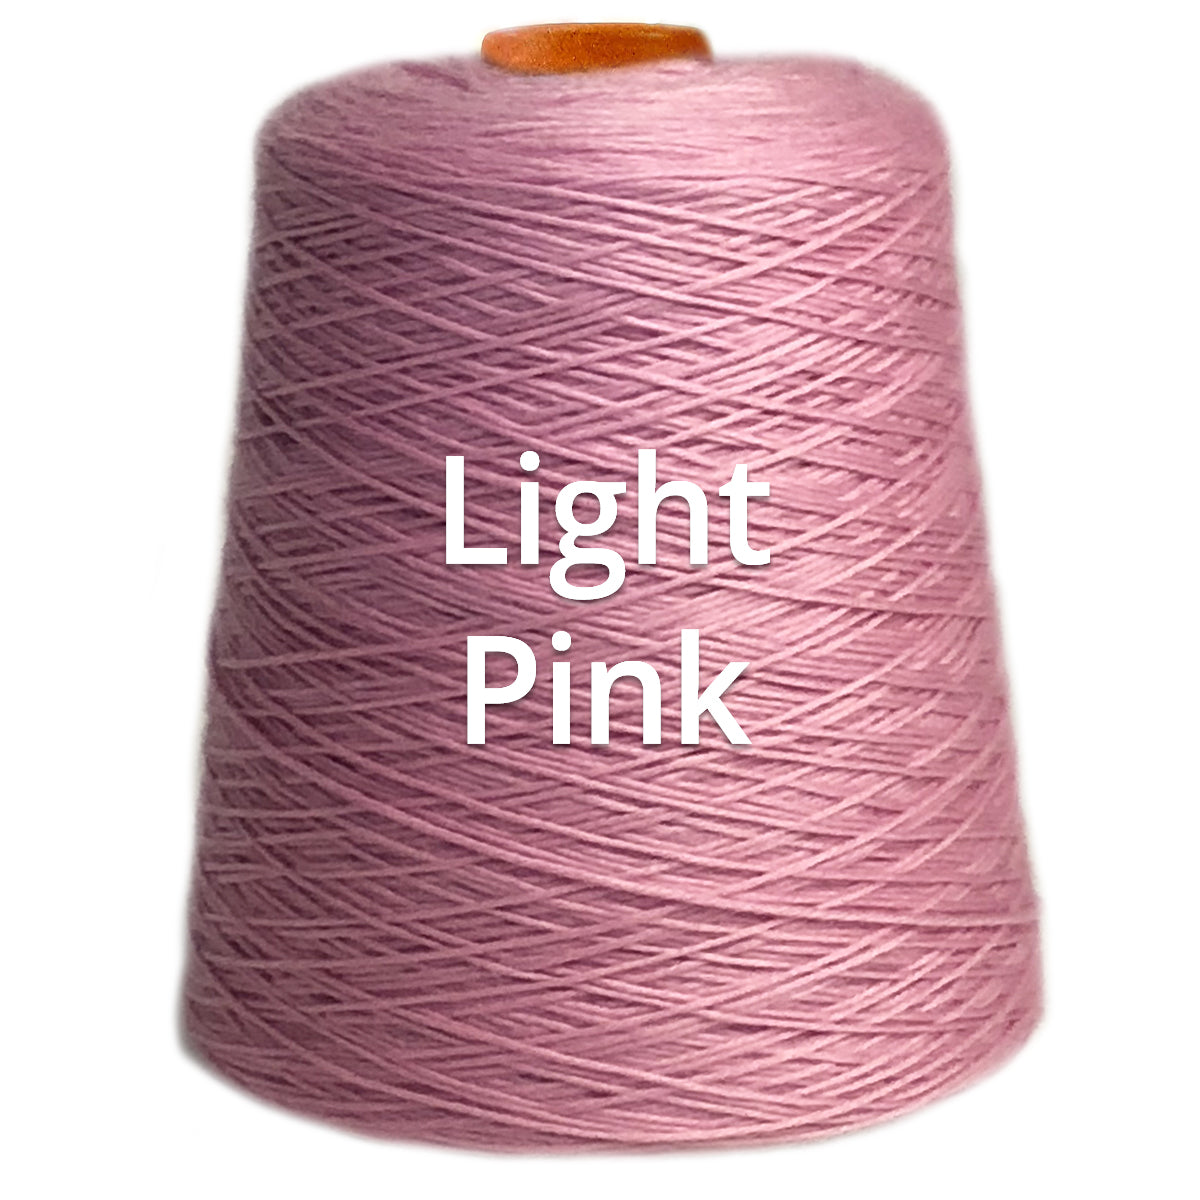 Light Pink - Nundle Collection 4 ply Chaffey Yarn 400g Cone